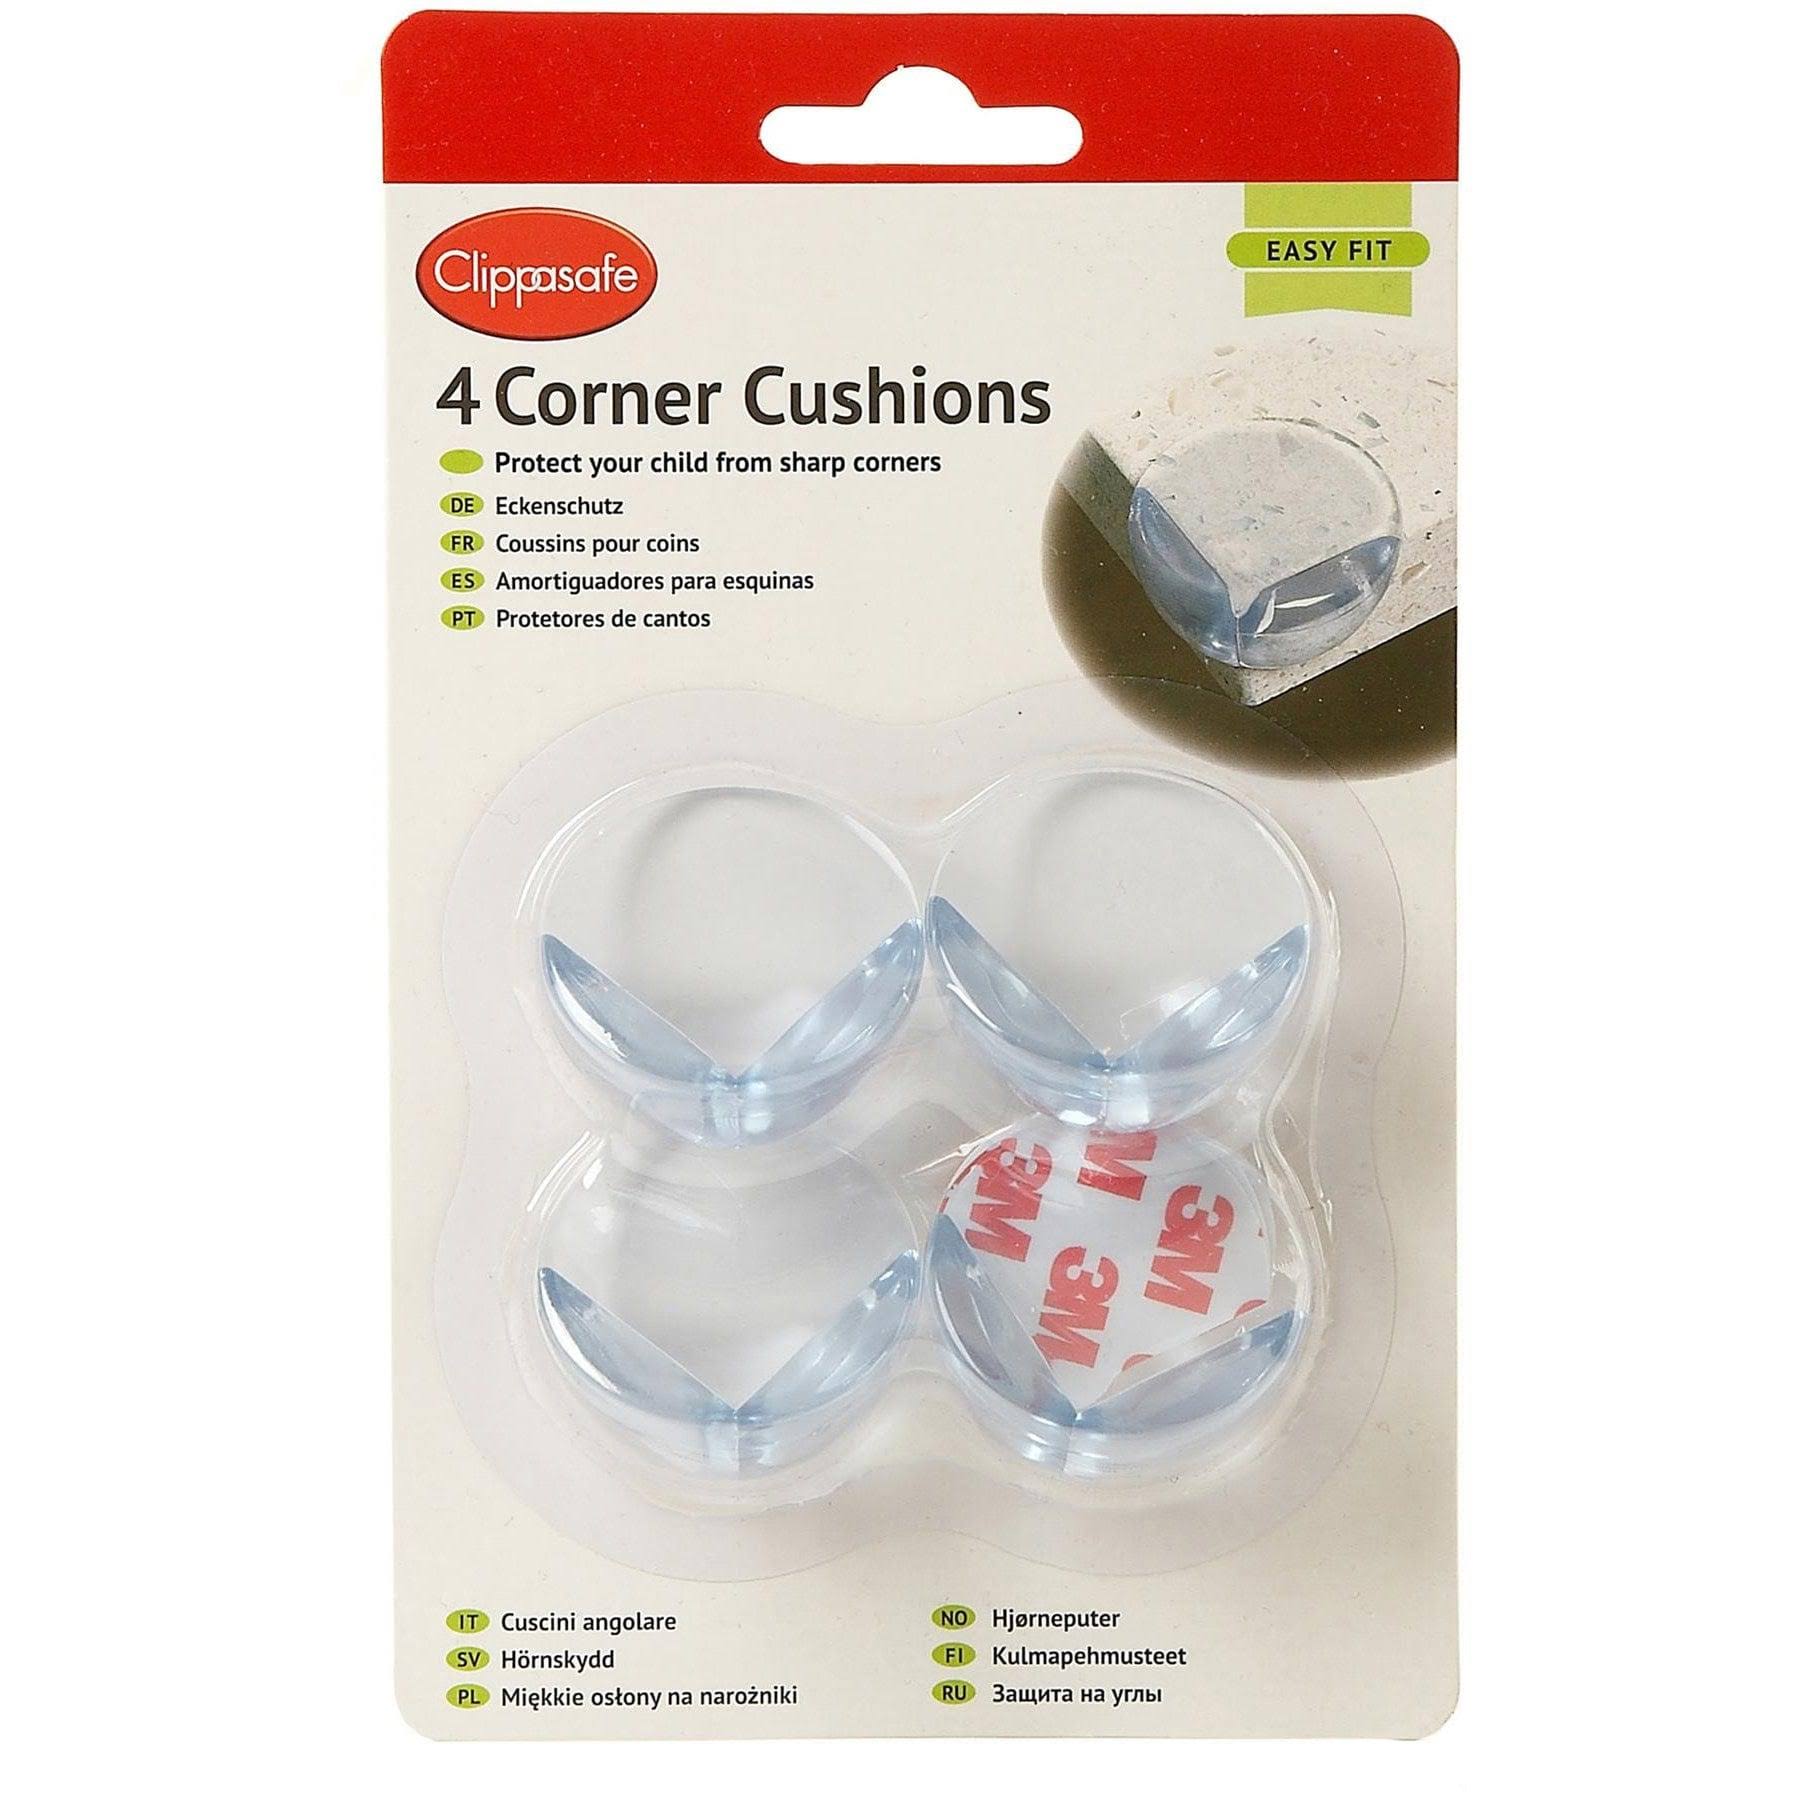 Clippasafe CORNER CUSHIONS FOR GLASS TOPS 4 PACK Baby Child Safety BN 